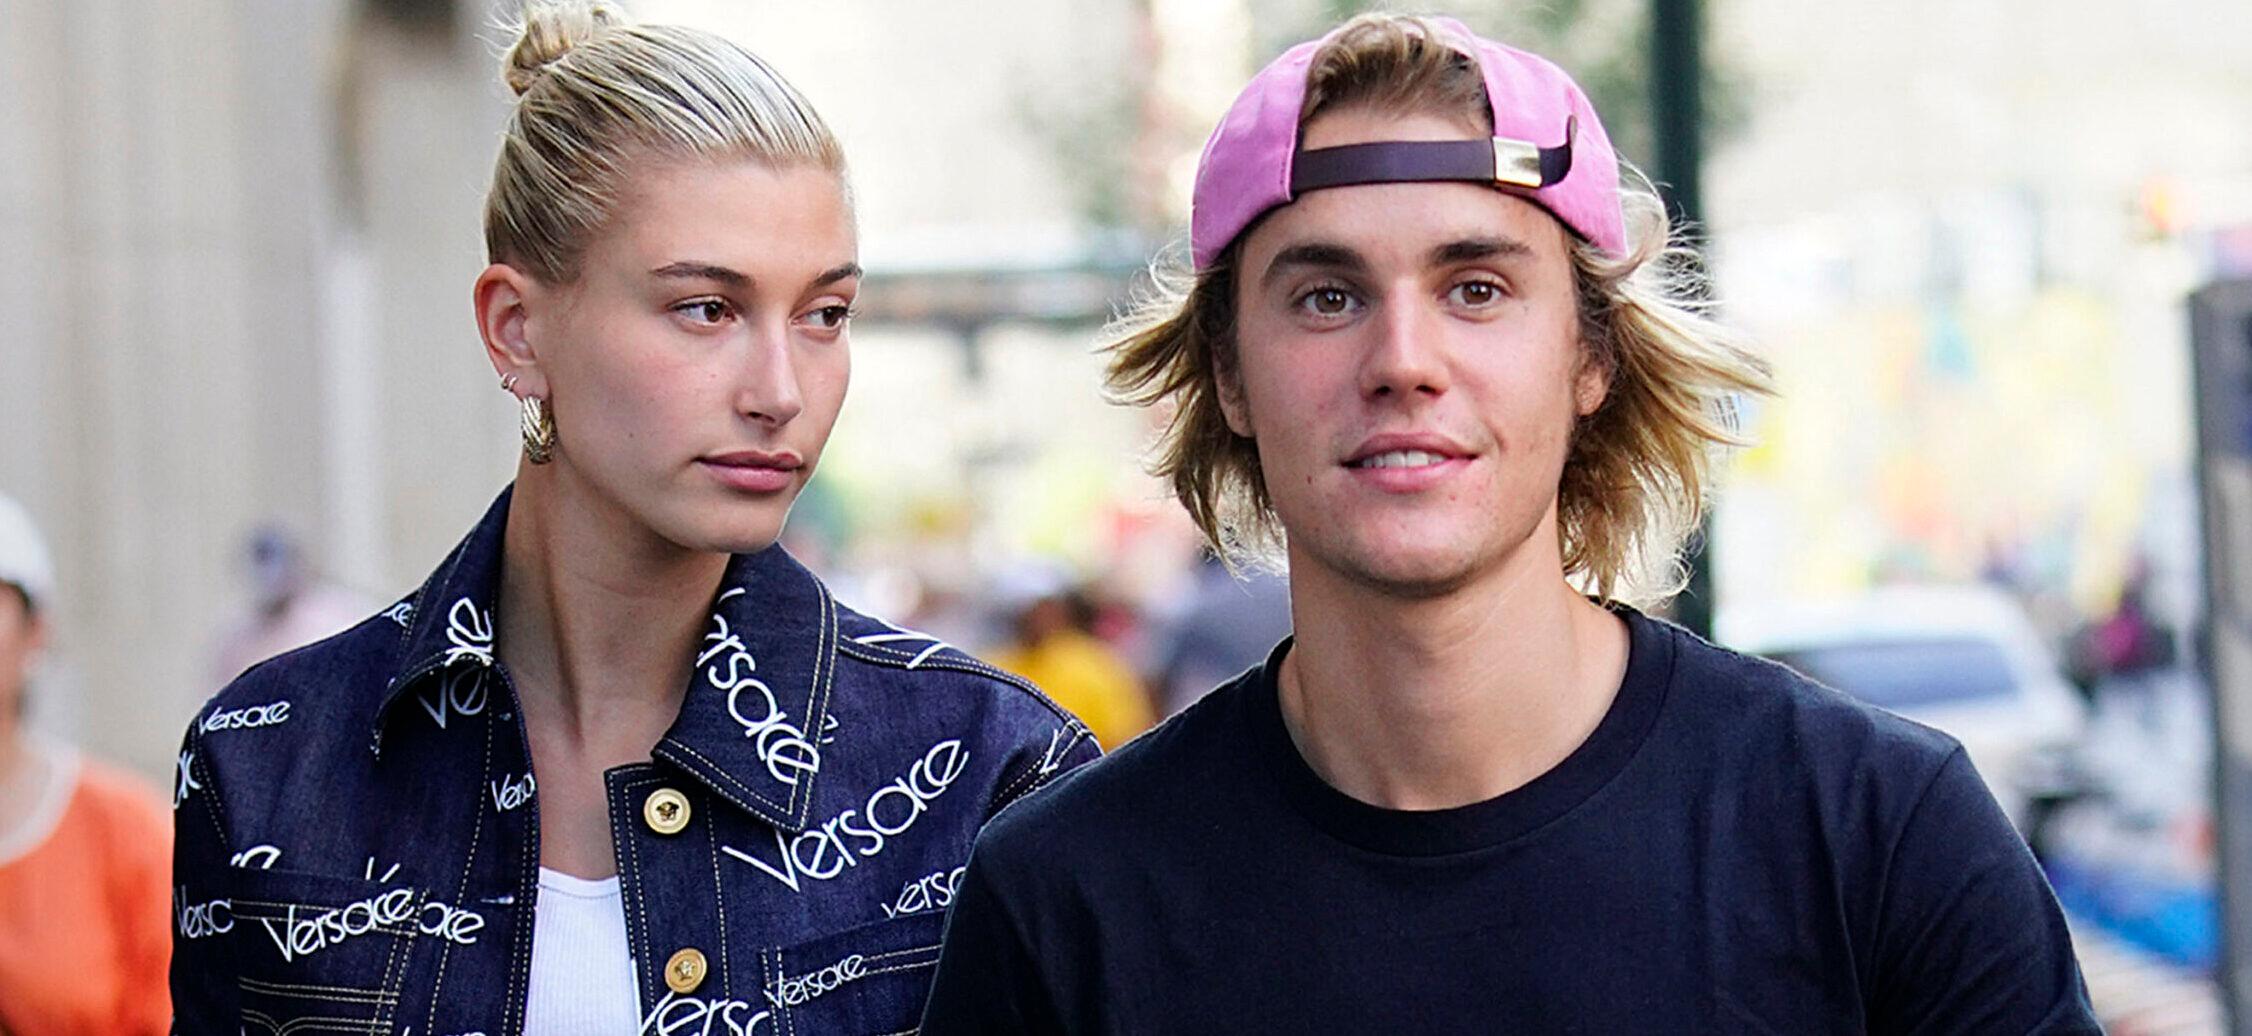 Justin Bieber and Hailey Bieber out and about in NYC.